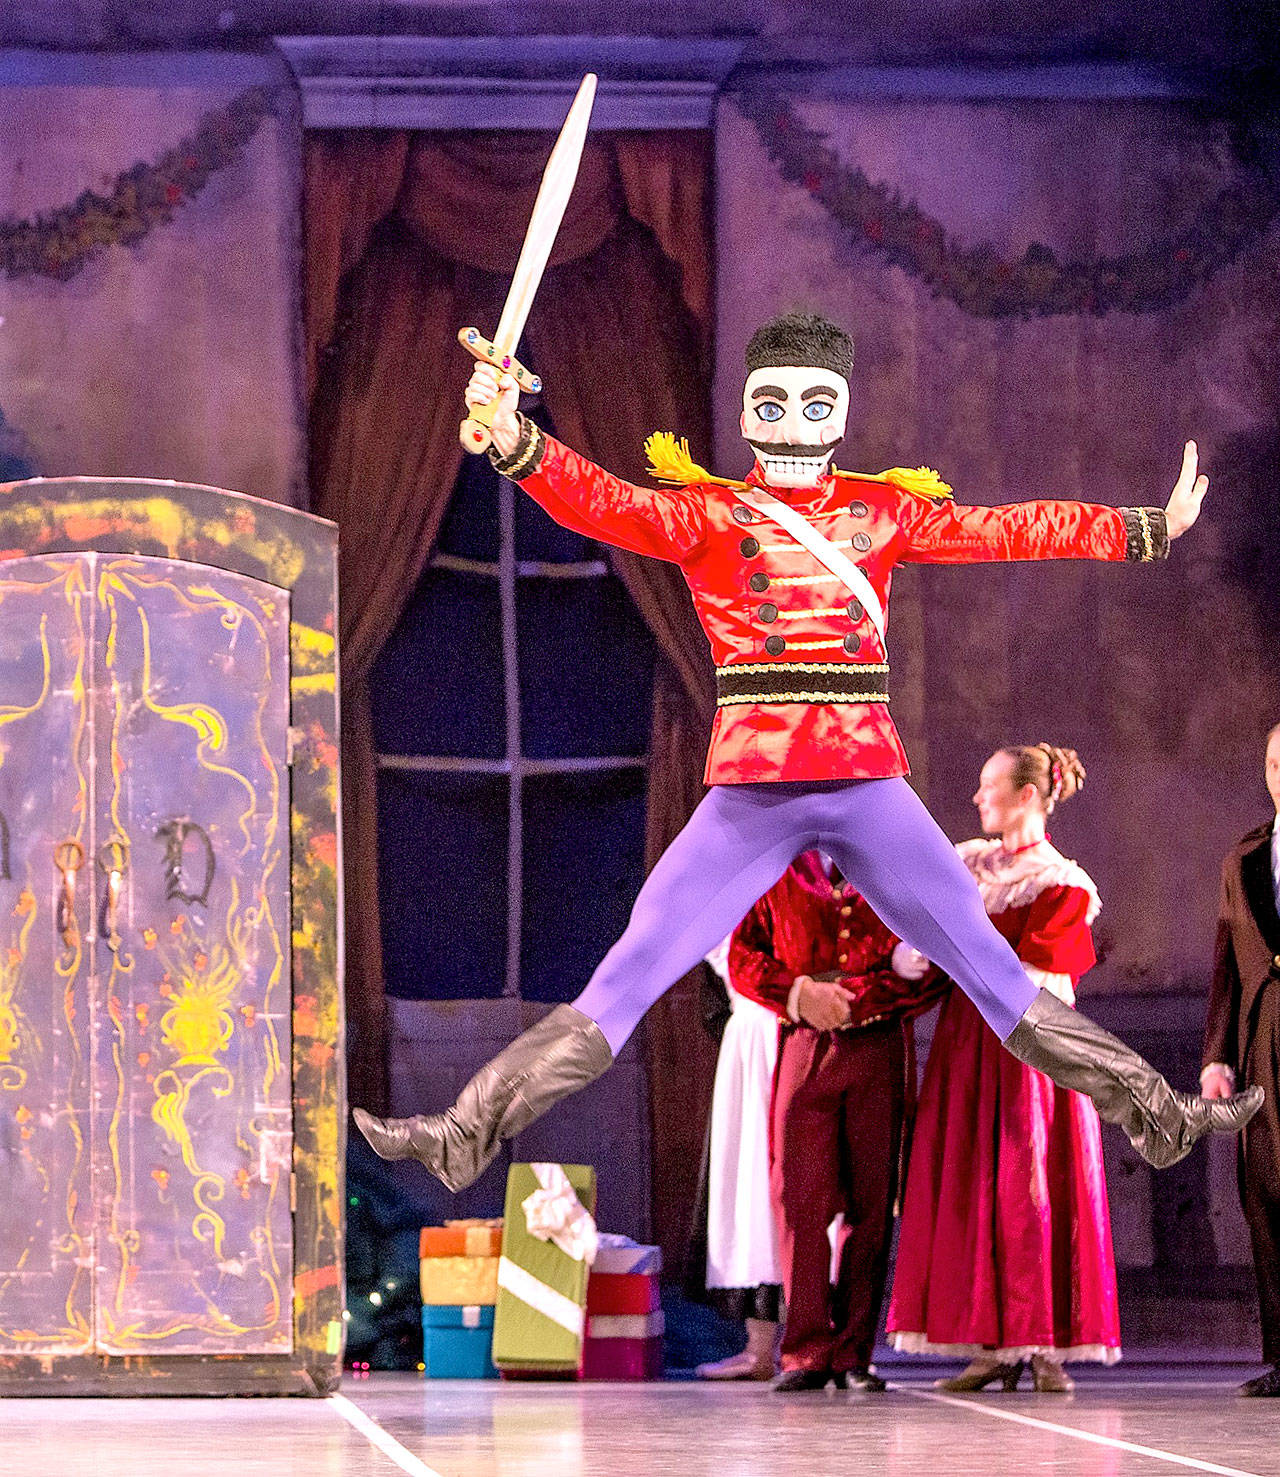 The Nutcracker Prince dances in a production of Olympic Ballet Theatre’s “The Nutcracker,” which will be performed at the Everett Performing Arts Center Dec. 13-15. (Alante Photography)